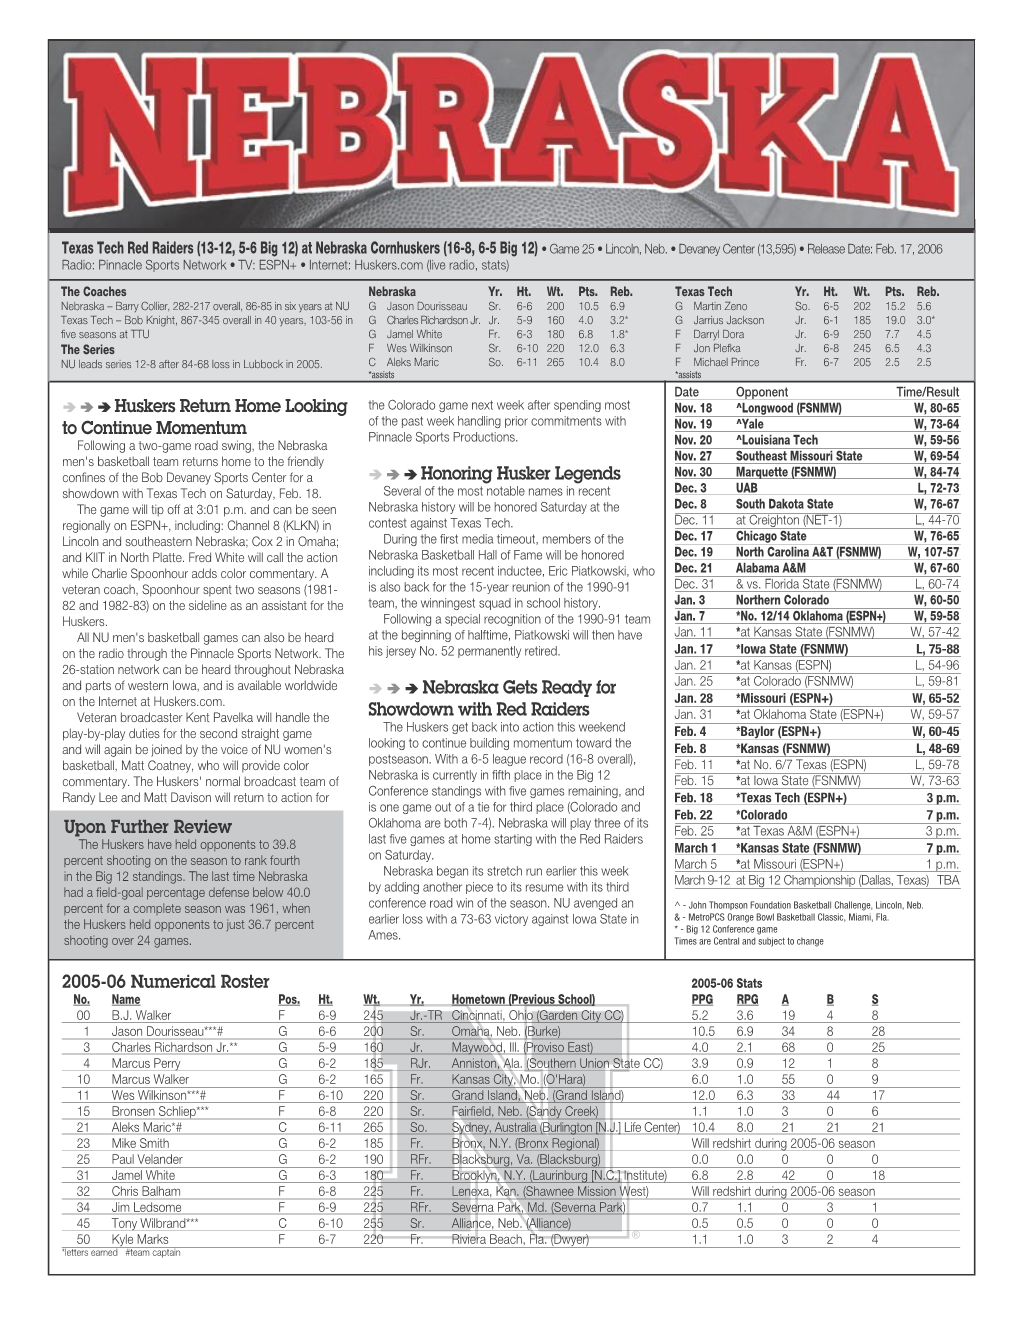 Huskers Return Home Looking to Continue